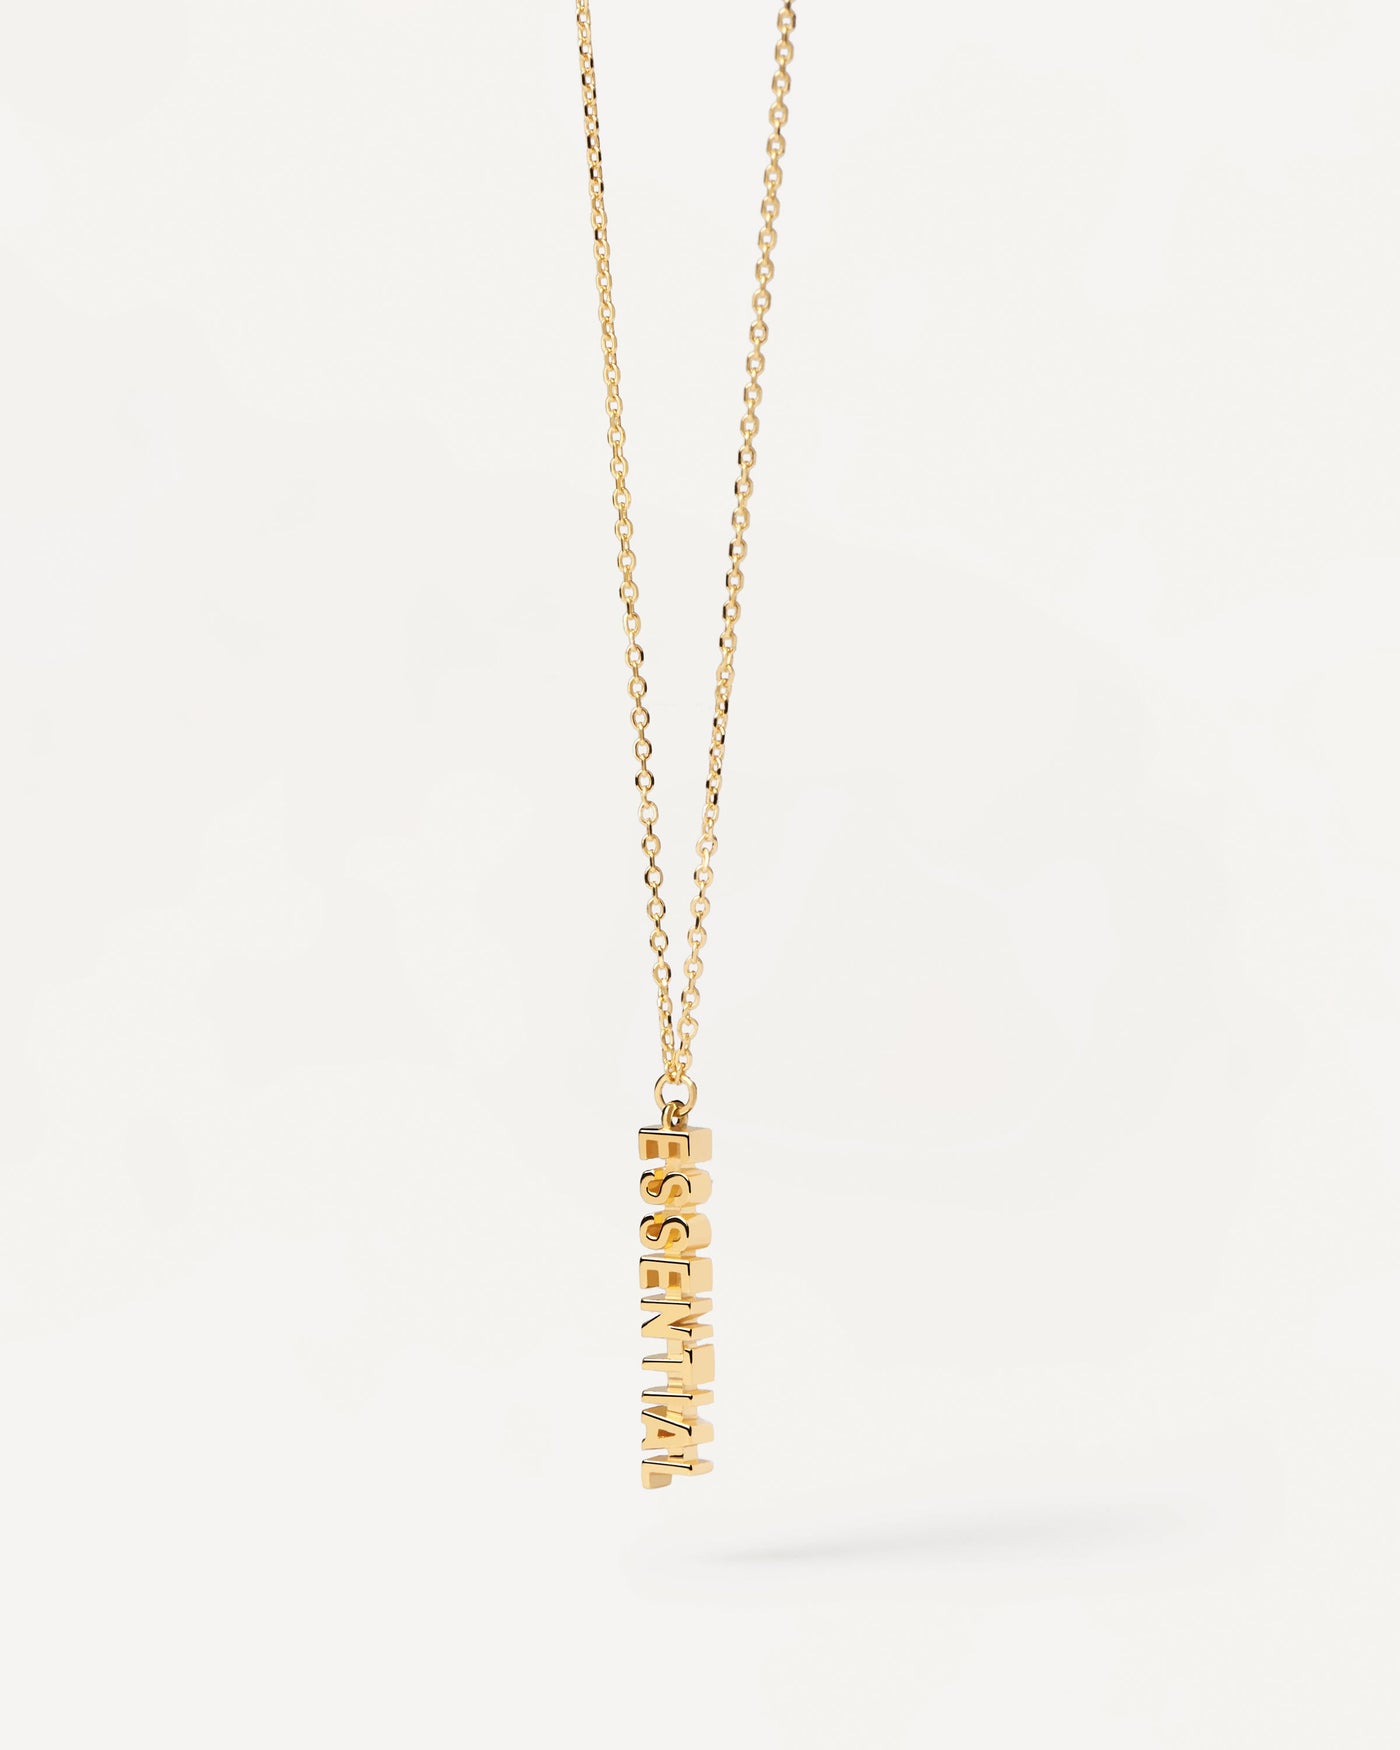 Essential Gold Necklace - 925 sterling silver / 18K gold plating